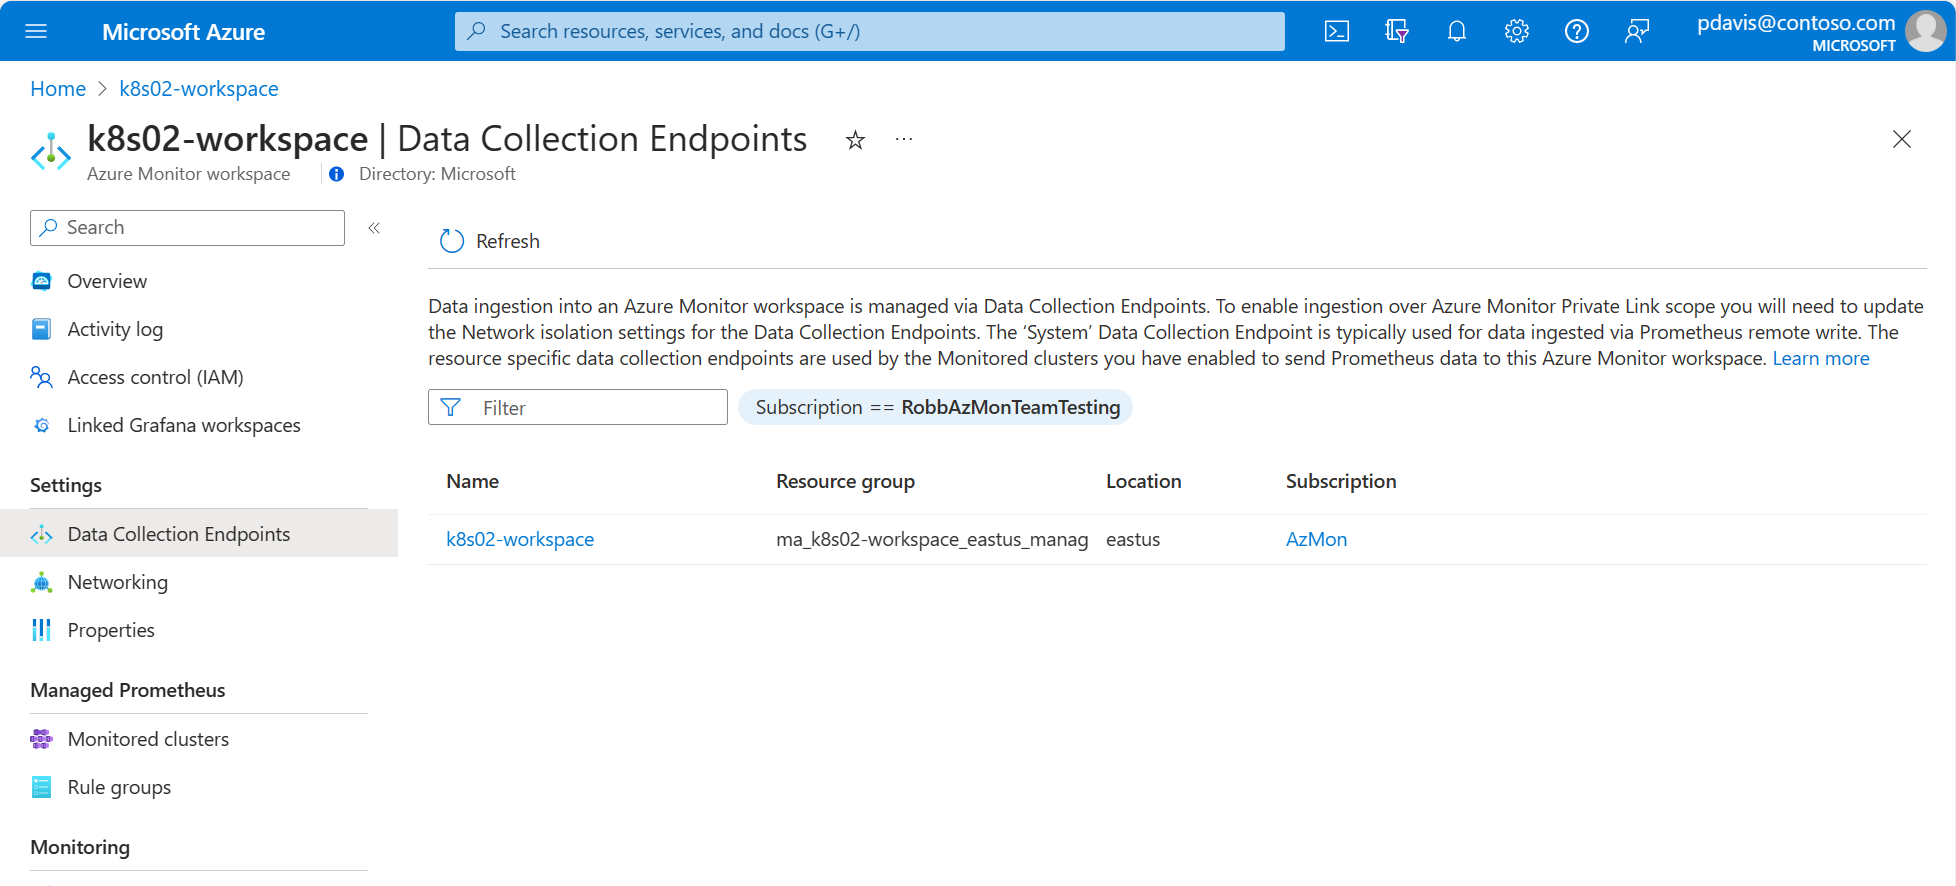 A screenshot show the data collection endpoints page for an Azure Monitor workspace.